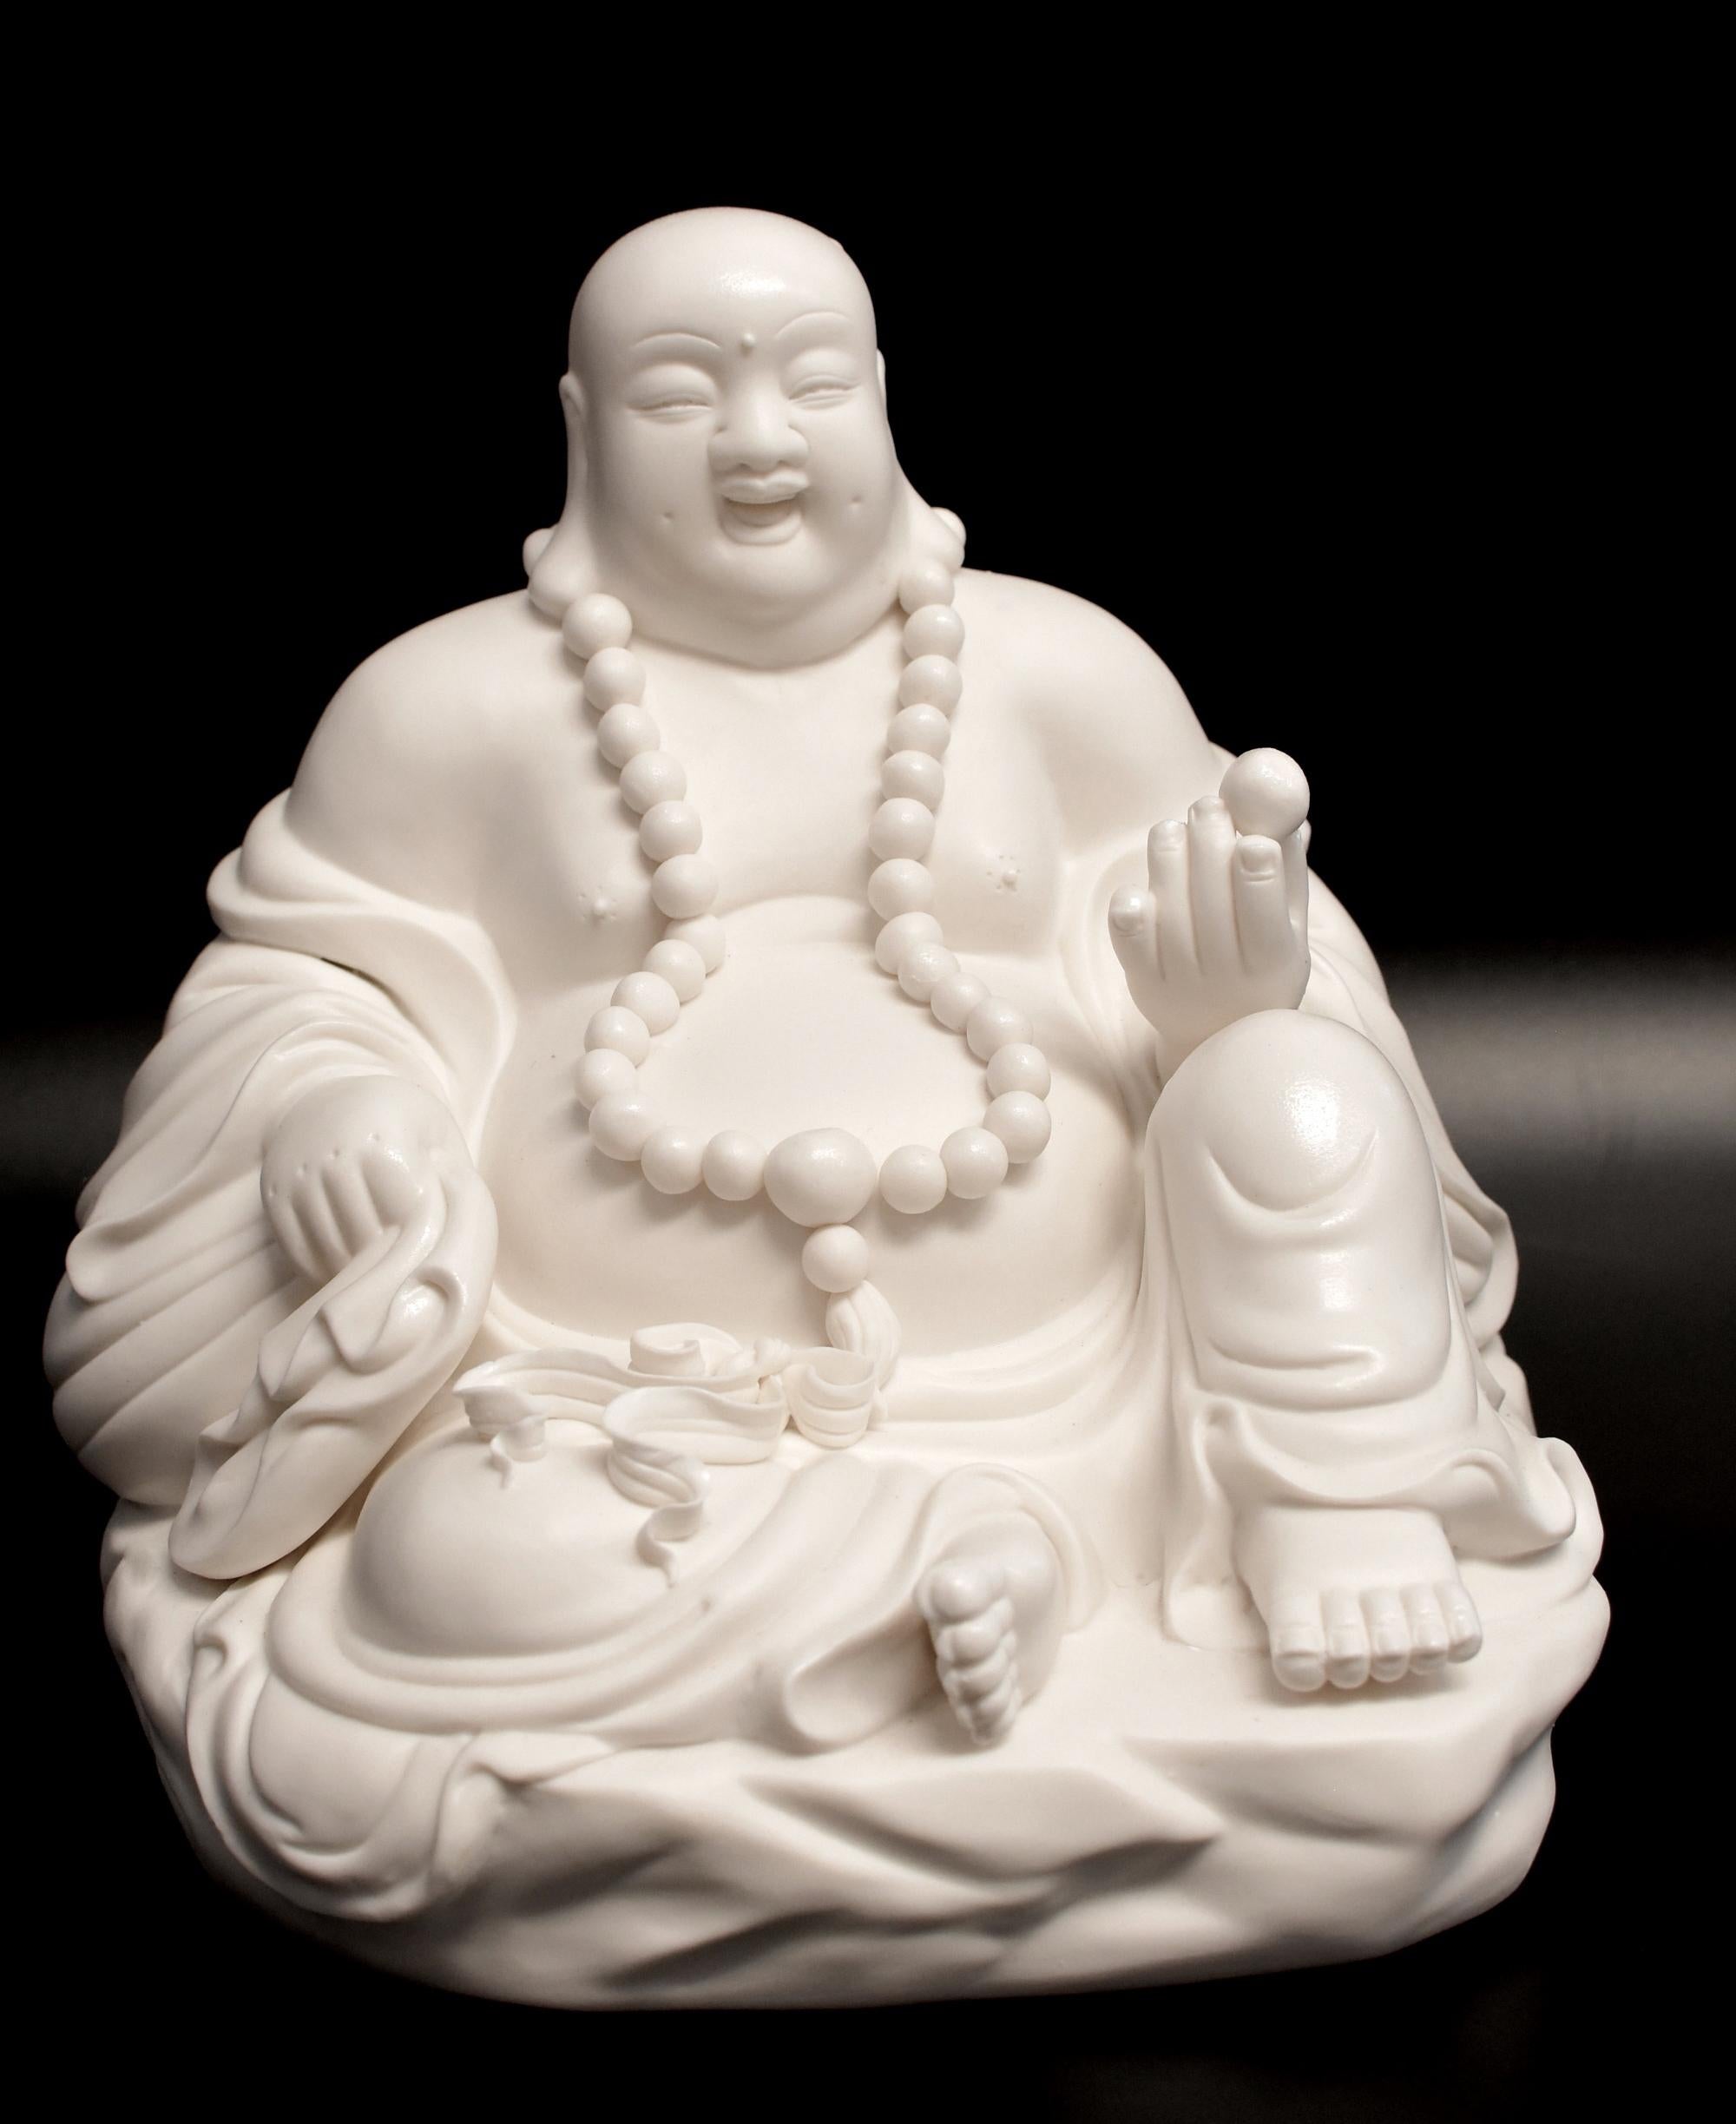 An exquisite Blanc De Chine Porcelain happy Buddha, his broad face with a joyful expression, long slender eyes beneath arched brows above an open mouth, all flanked by long pendulous ear lobes. Rope of prayer beads and a pearl in one hand symbolize